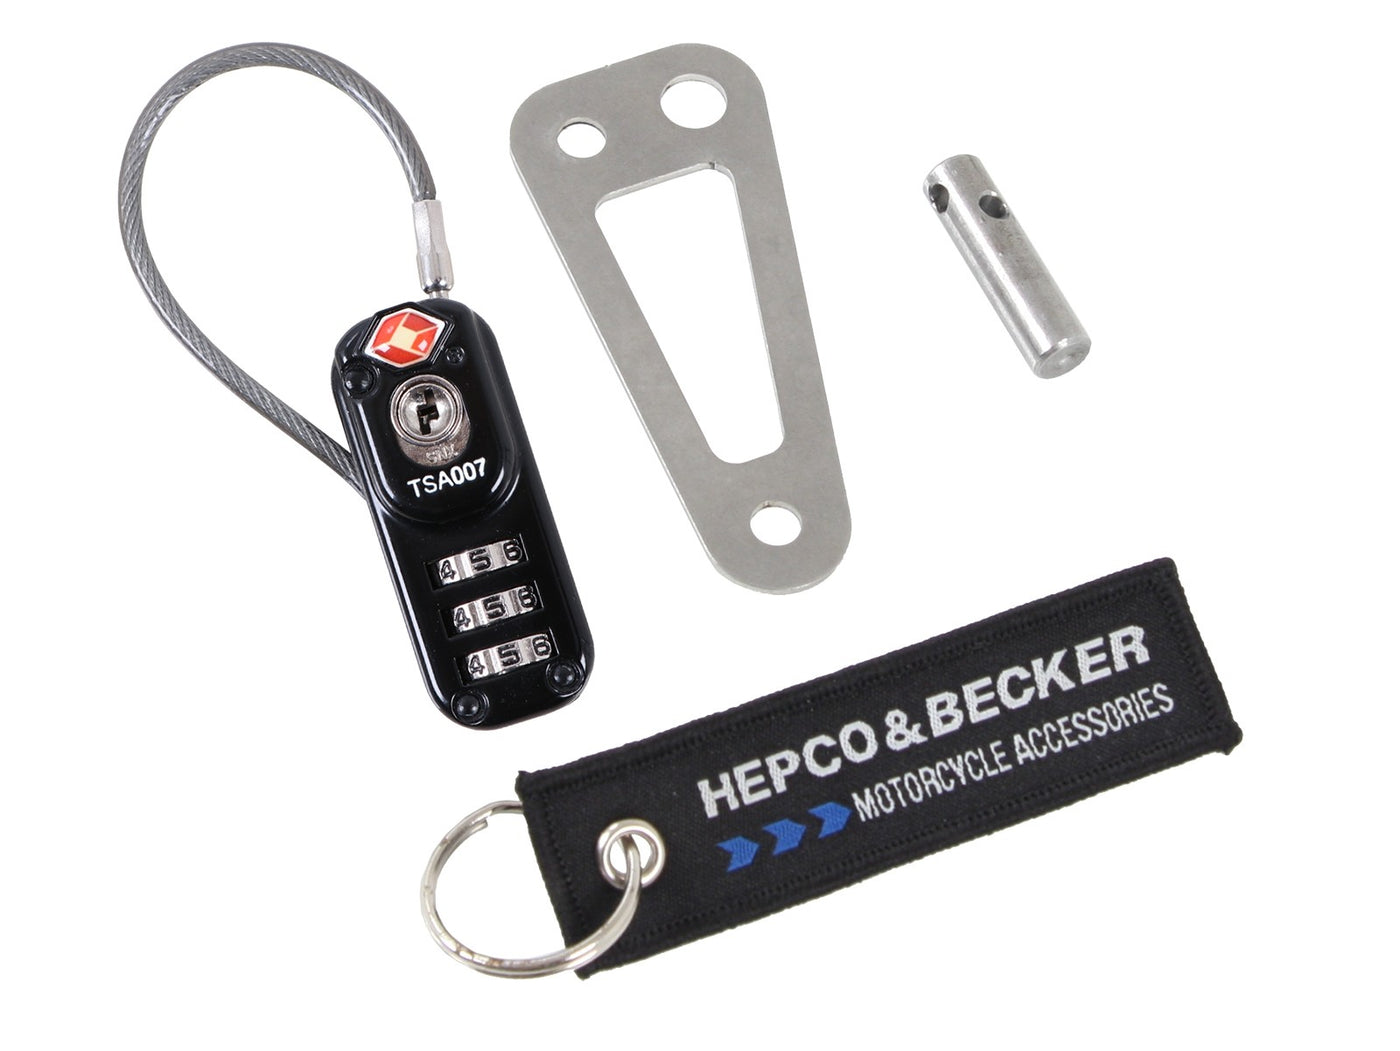 Anti-Theft Device for Hepco&Becker Tank Bags